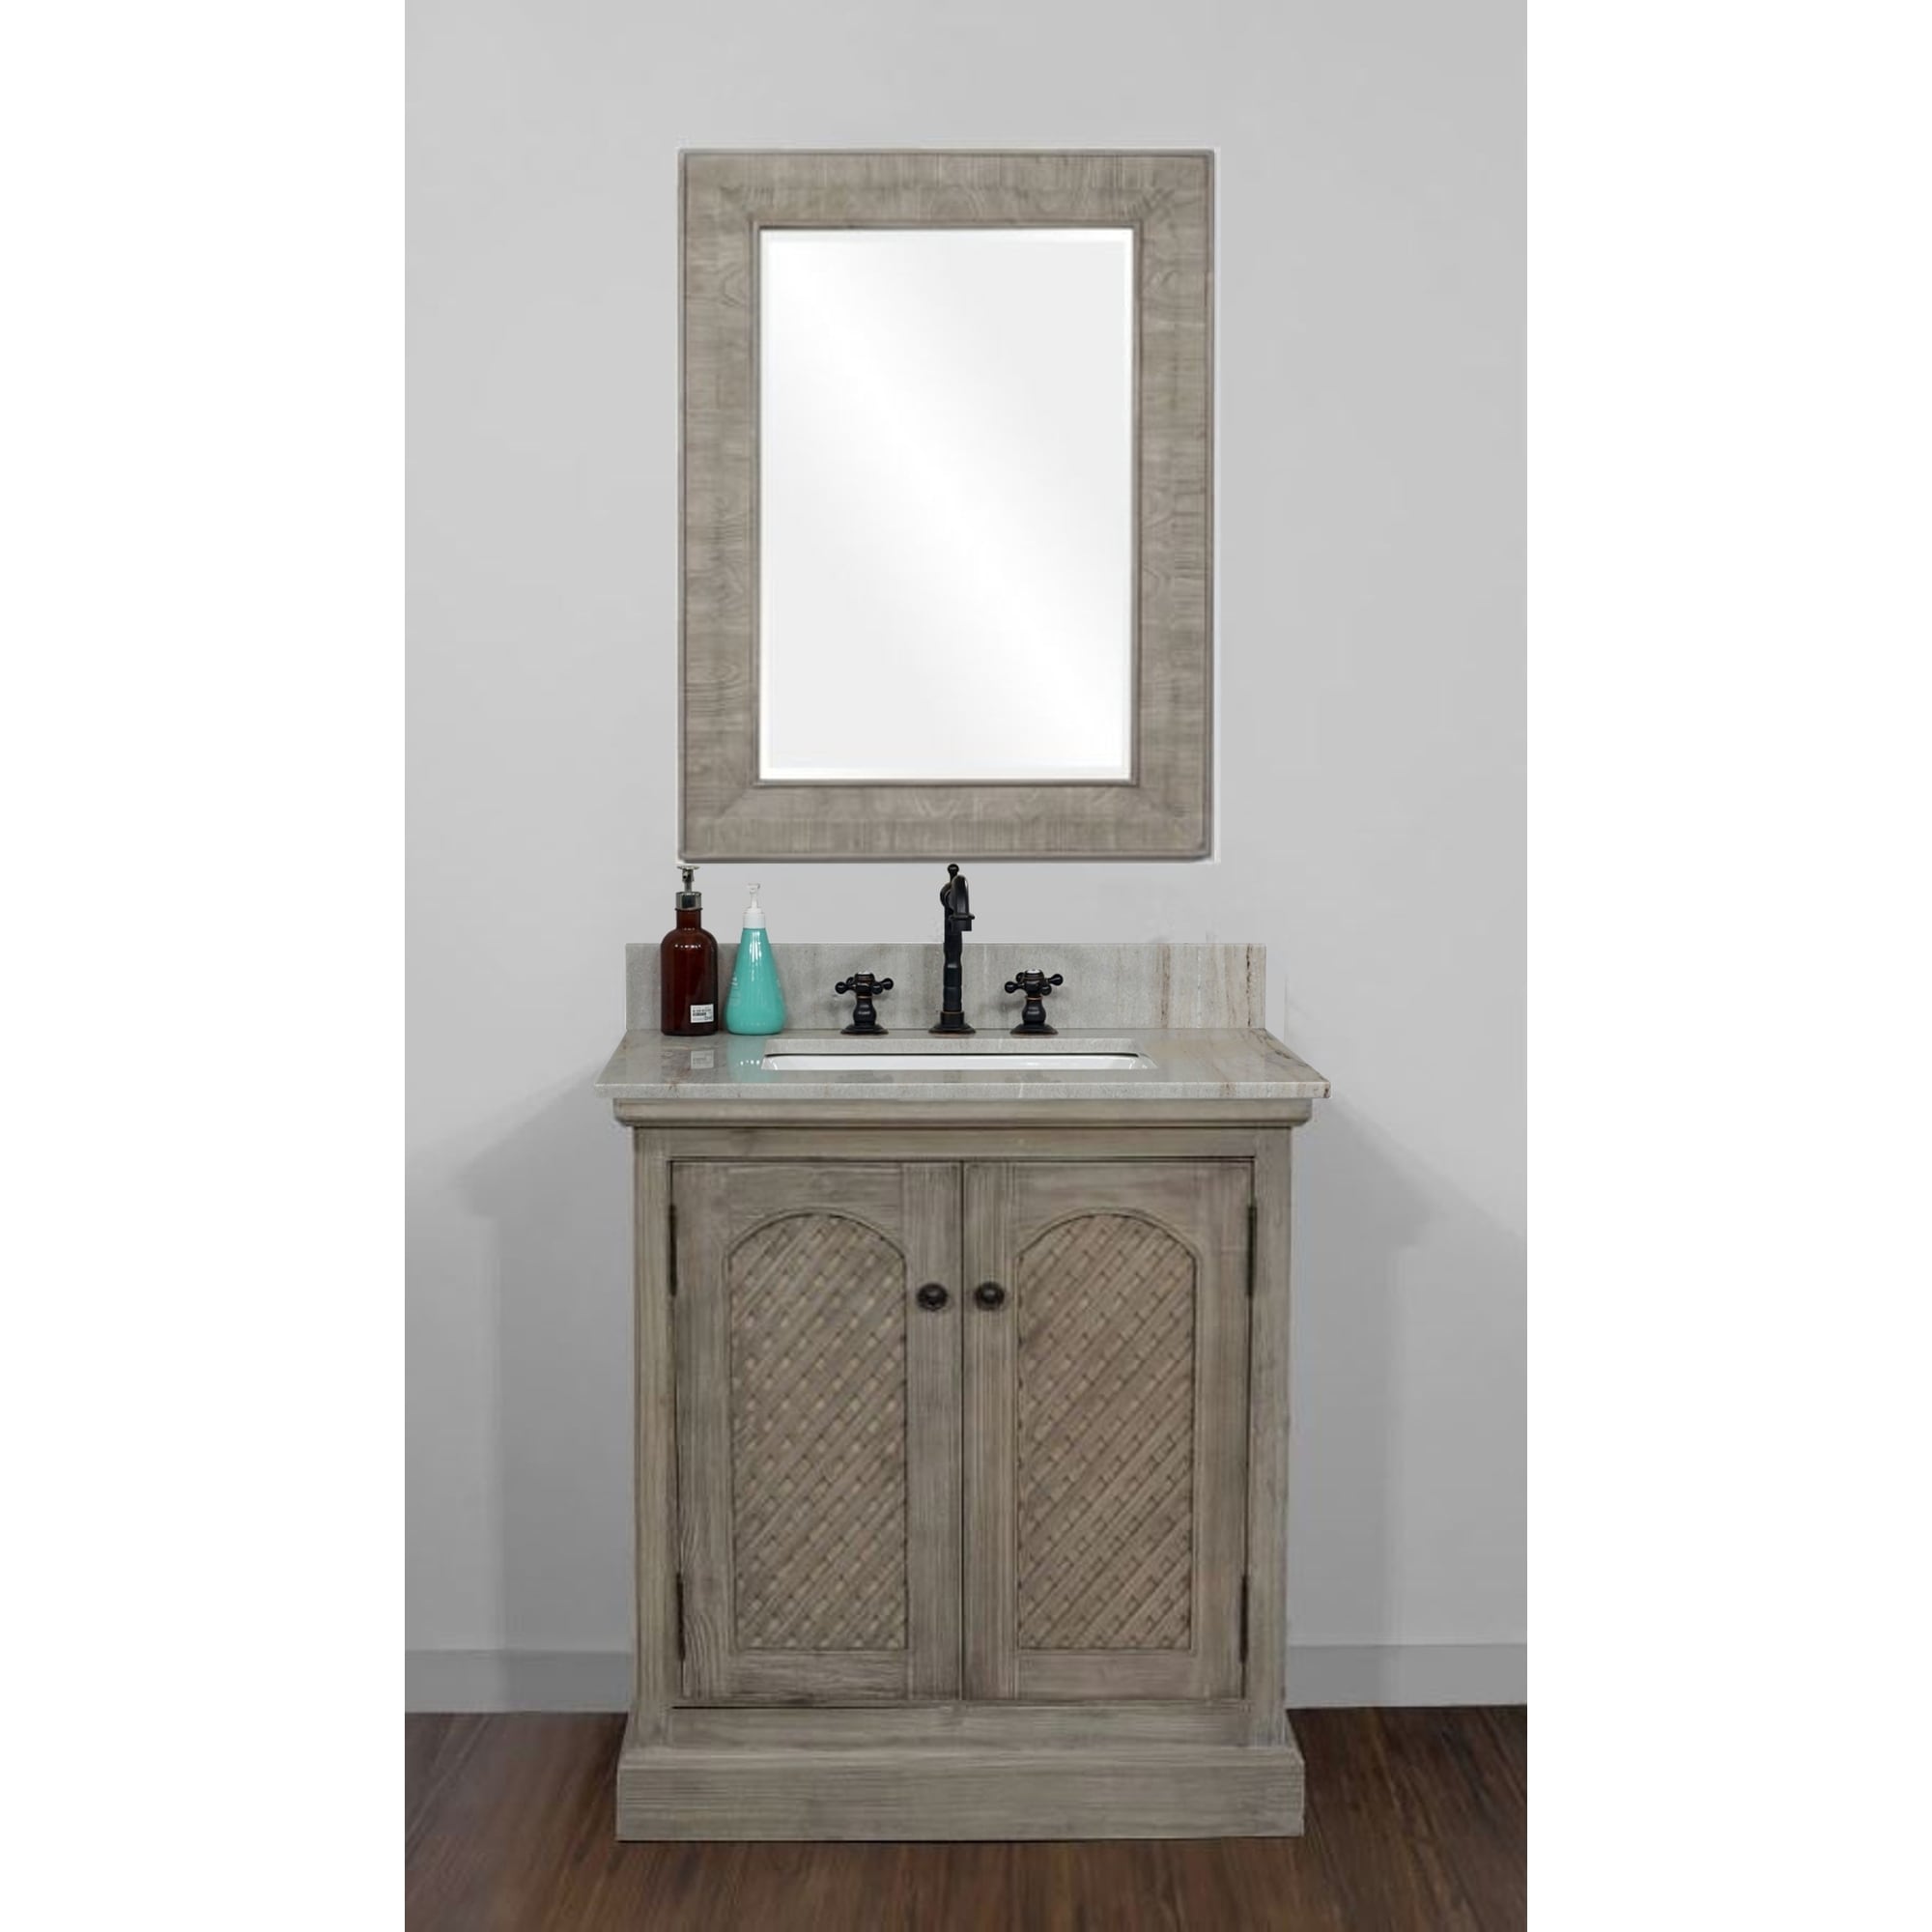 Rustic Style 31 Inch Single Sink Bathroom Vanity With Coastal Sand Marble Top No Faucet Today